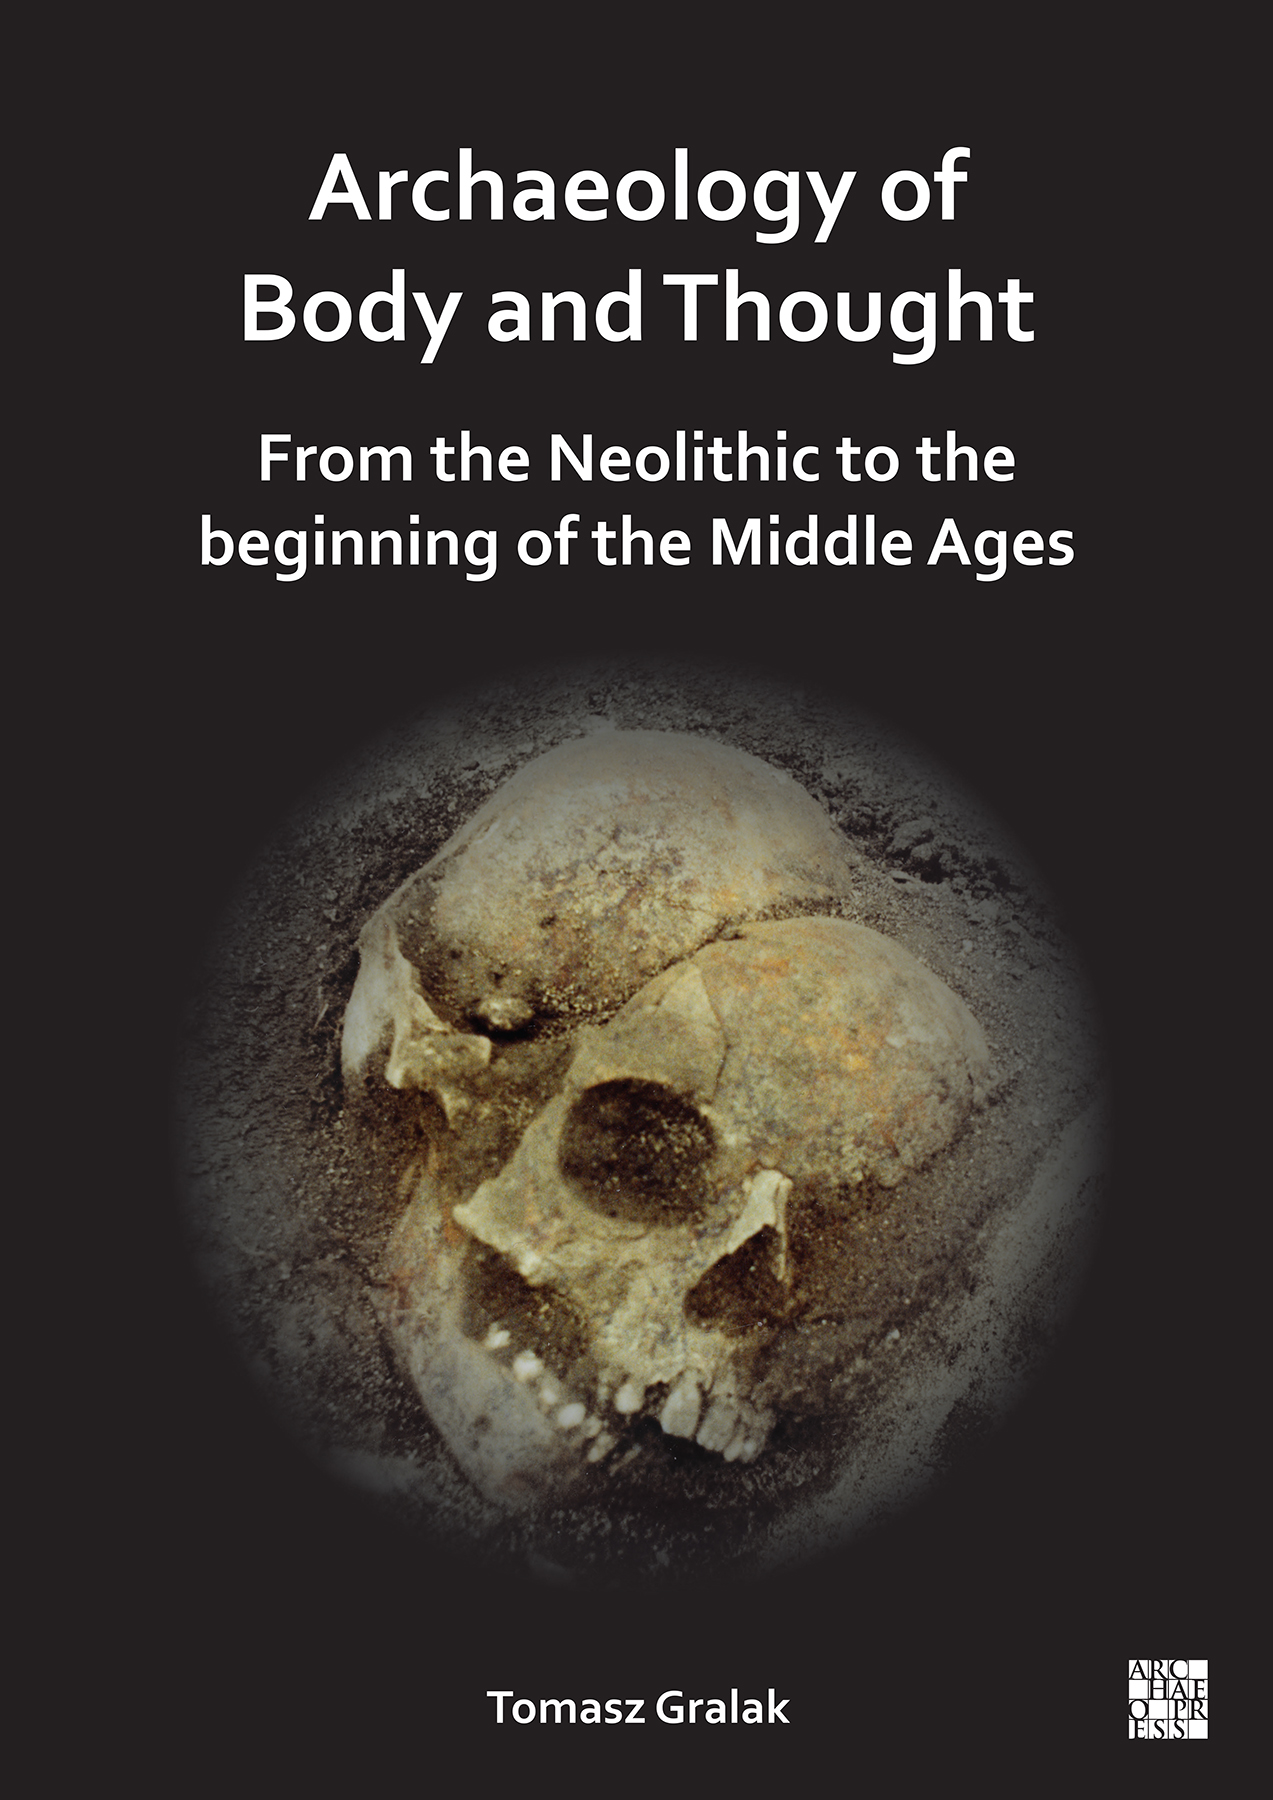 Archaeology of Body and Thought. From the Neolithic to the Beginning of the Middle Ages, 2024, 206 p.